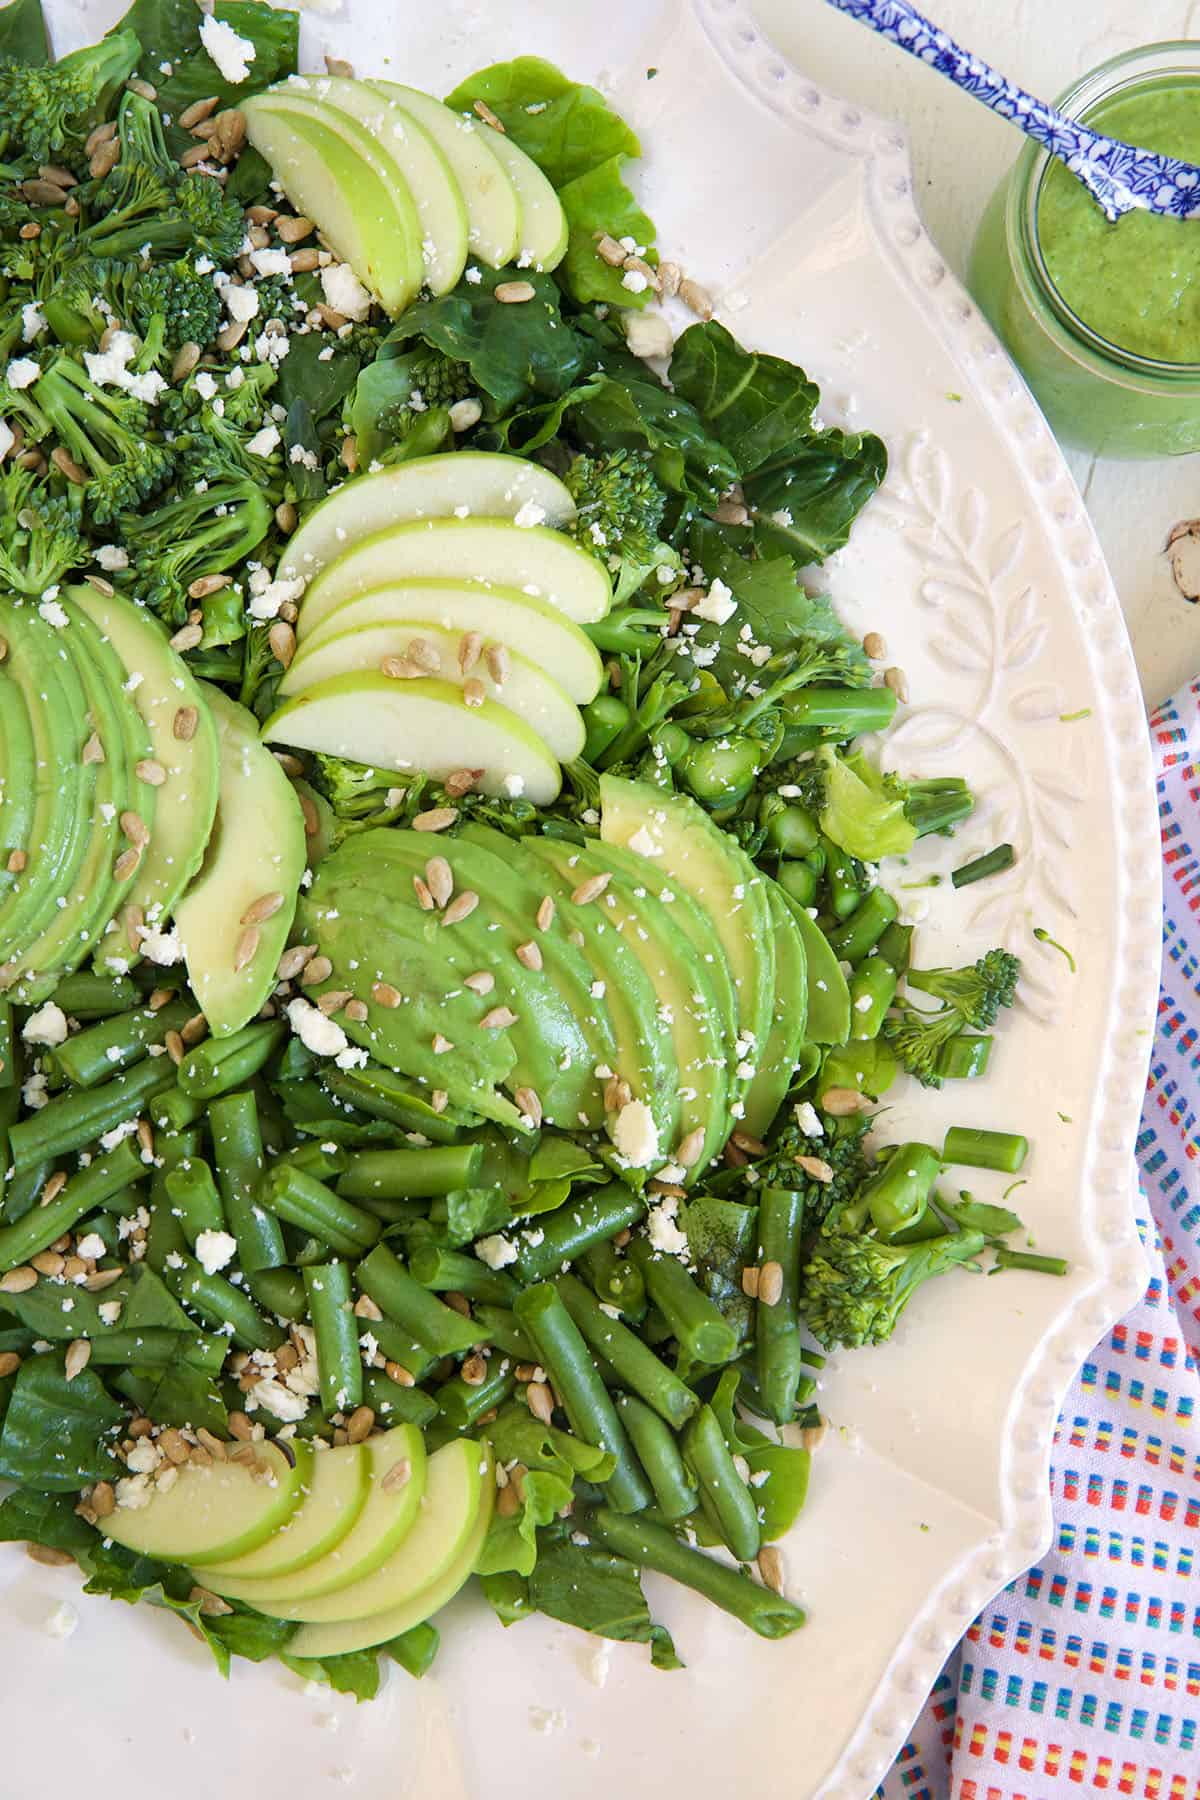 A green goddess salad is presented in a white serving bowl.